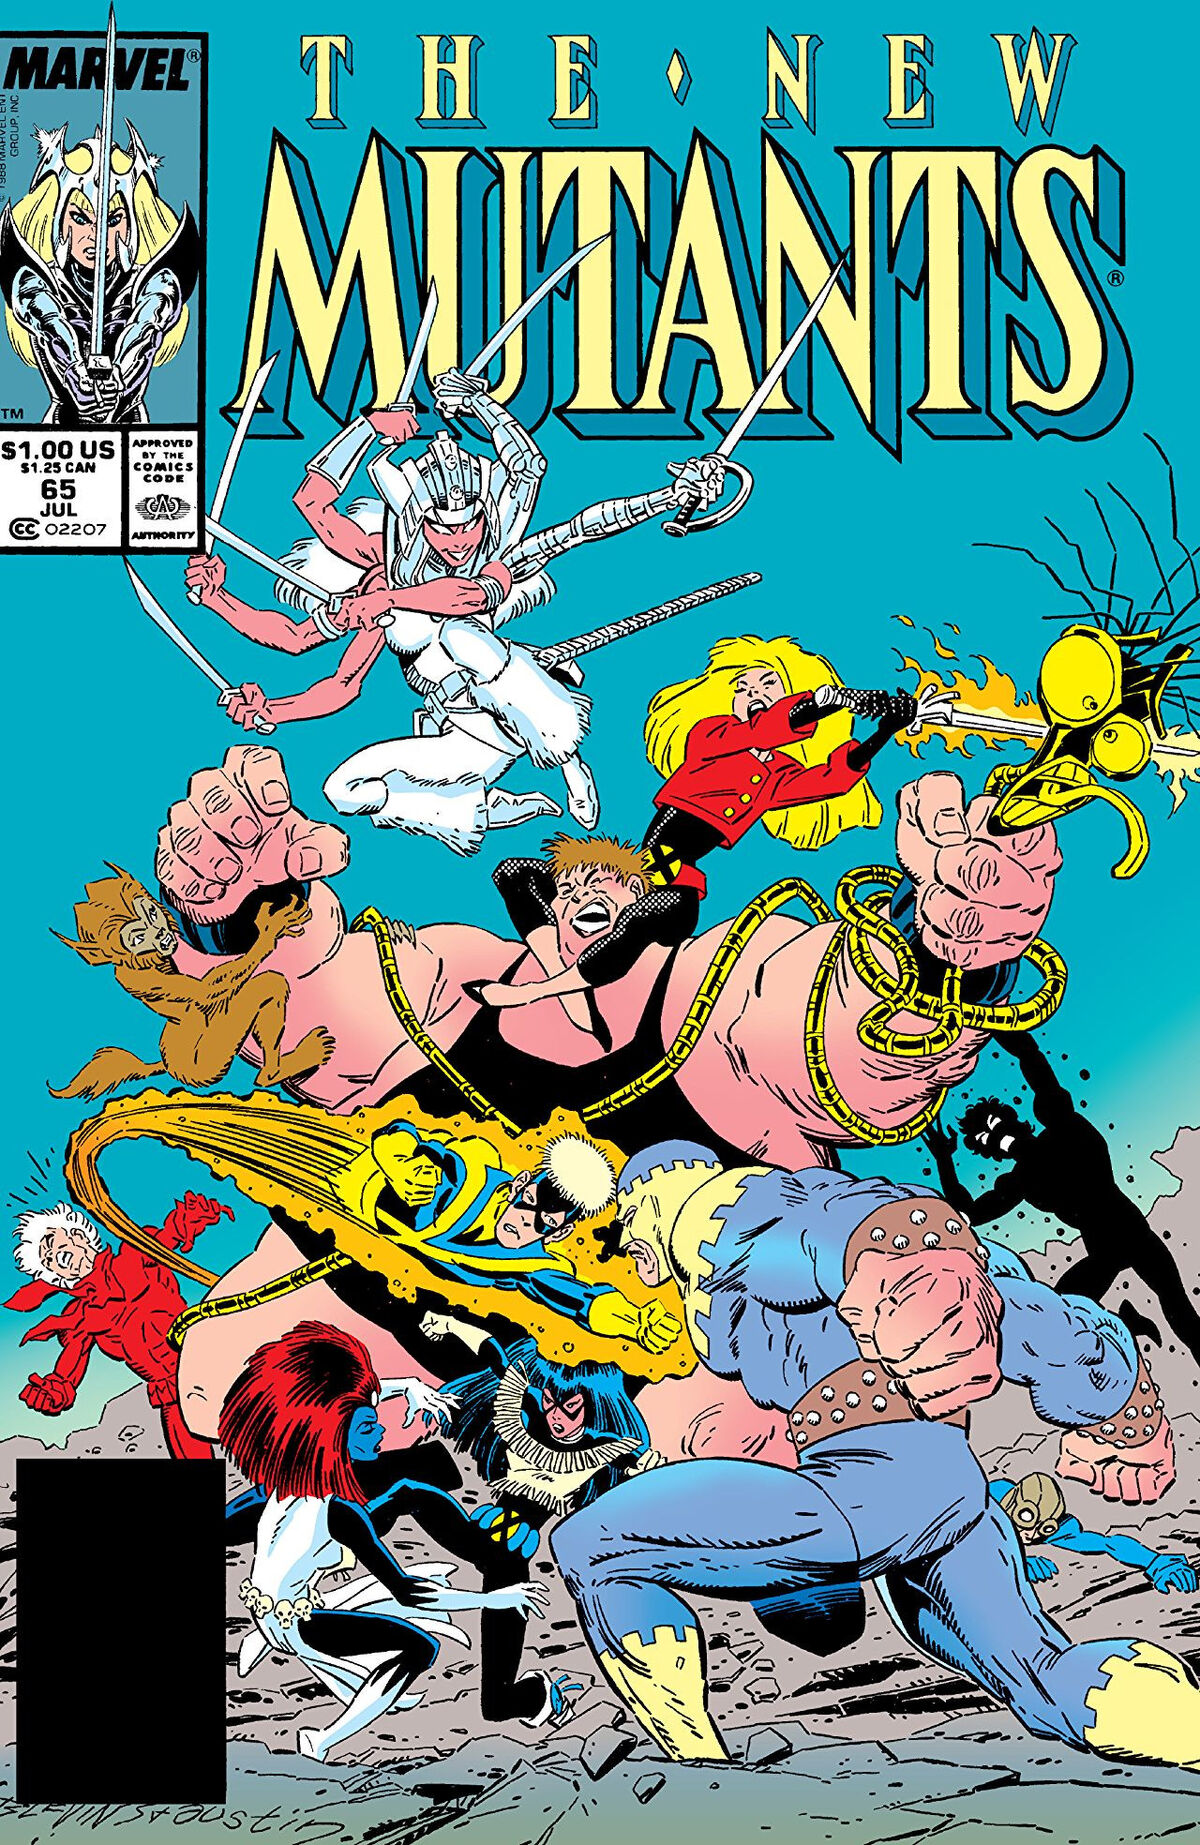 Well, I Finally Watched The New Mutants. . .